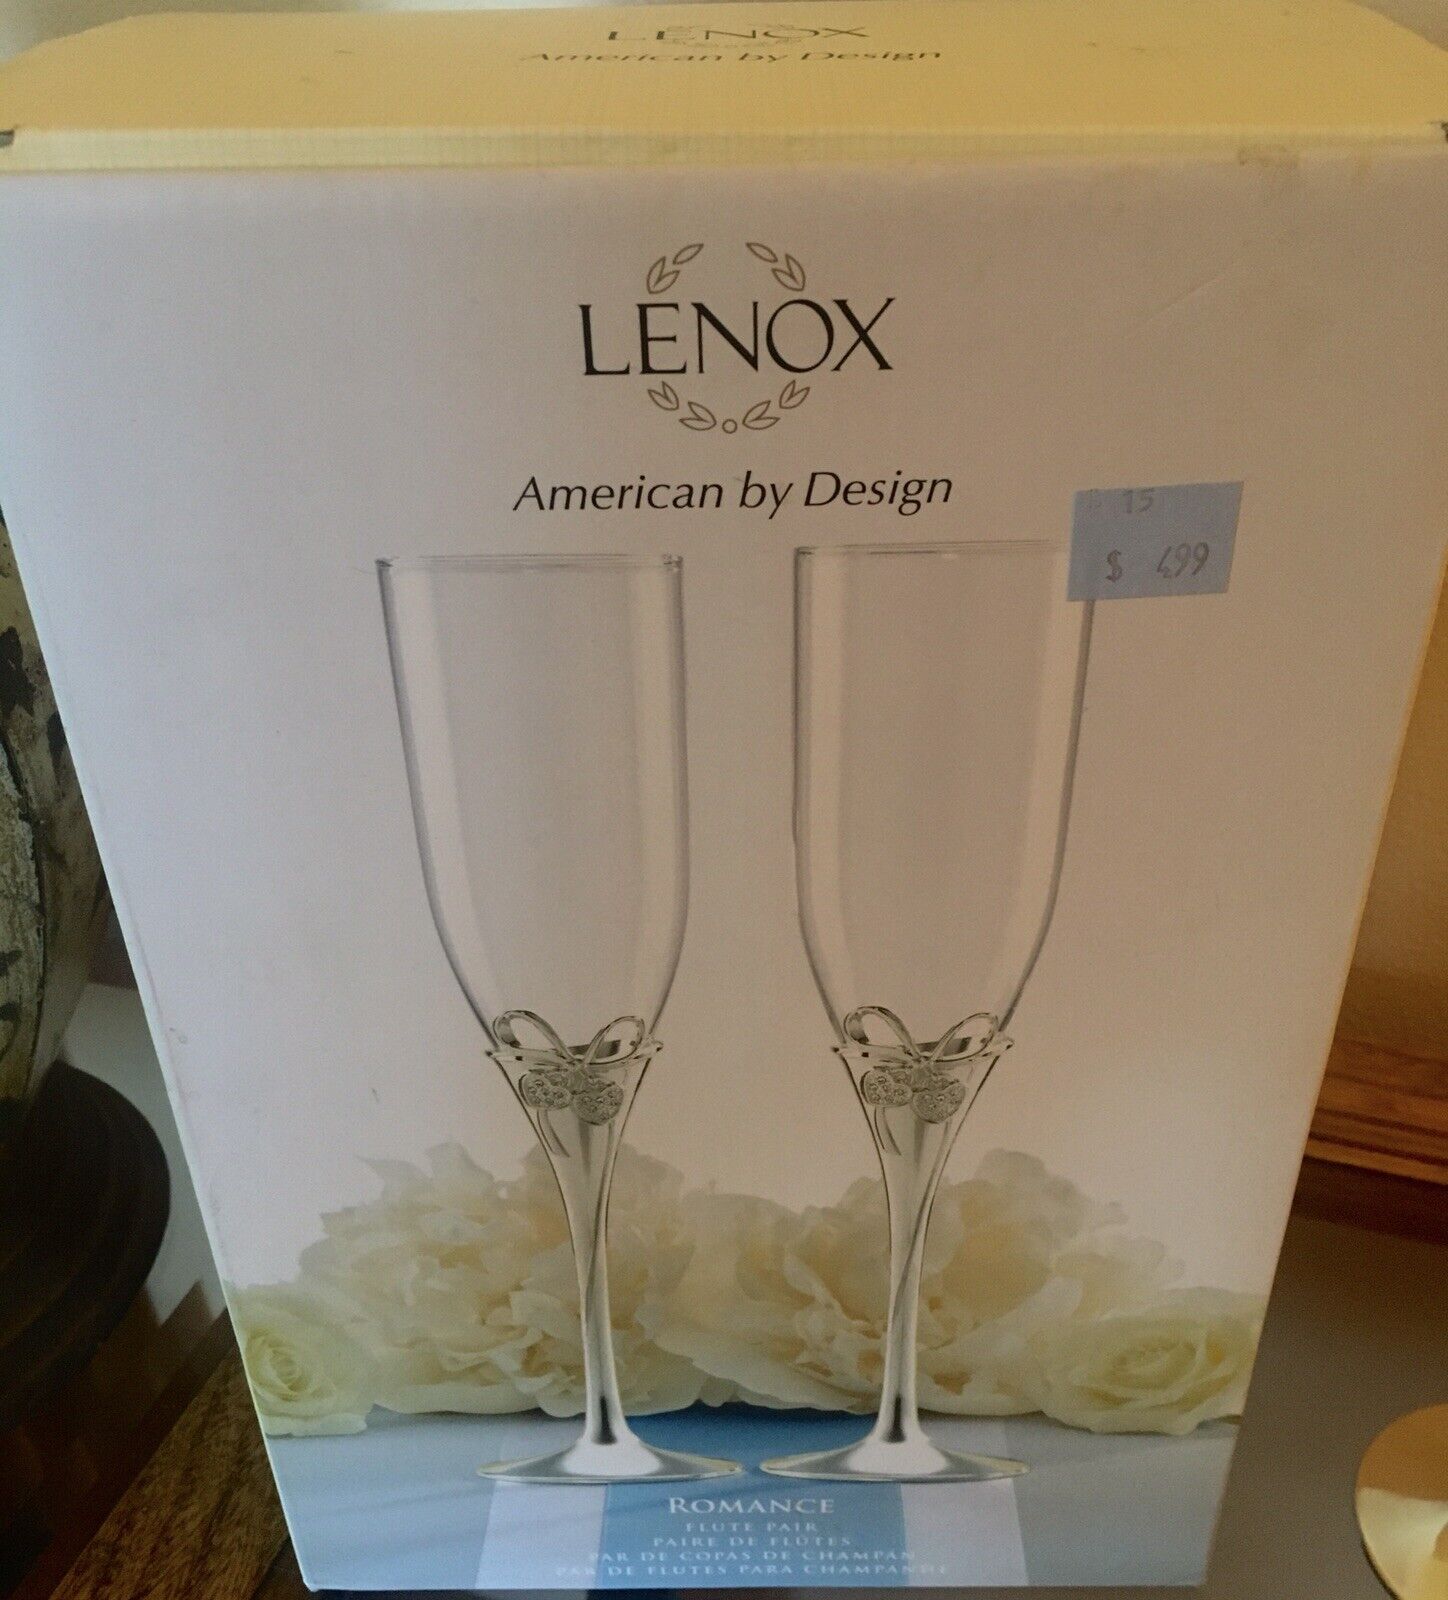 Lenox Silver Plated Romance Glasses. (New).